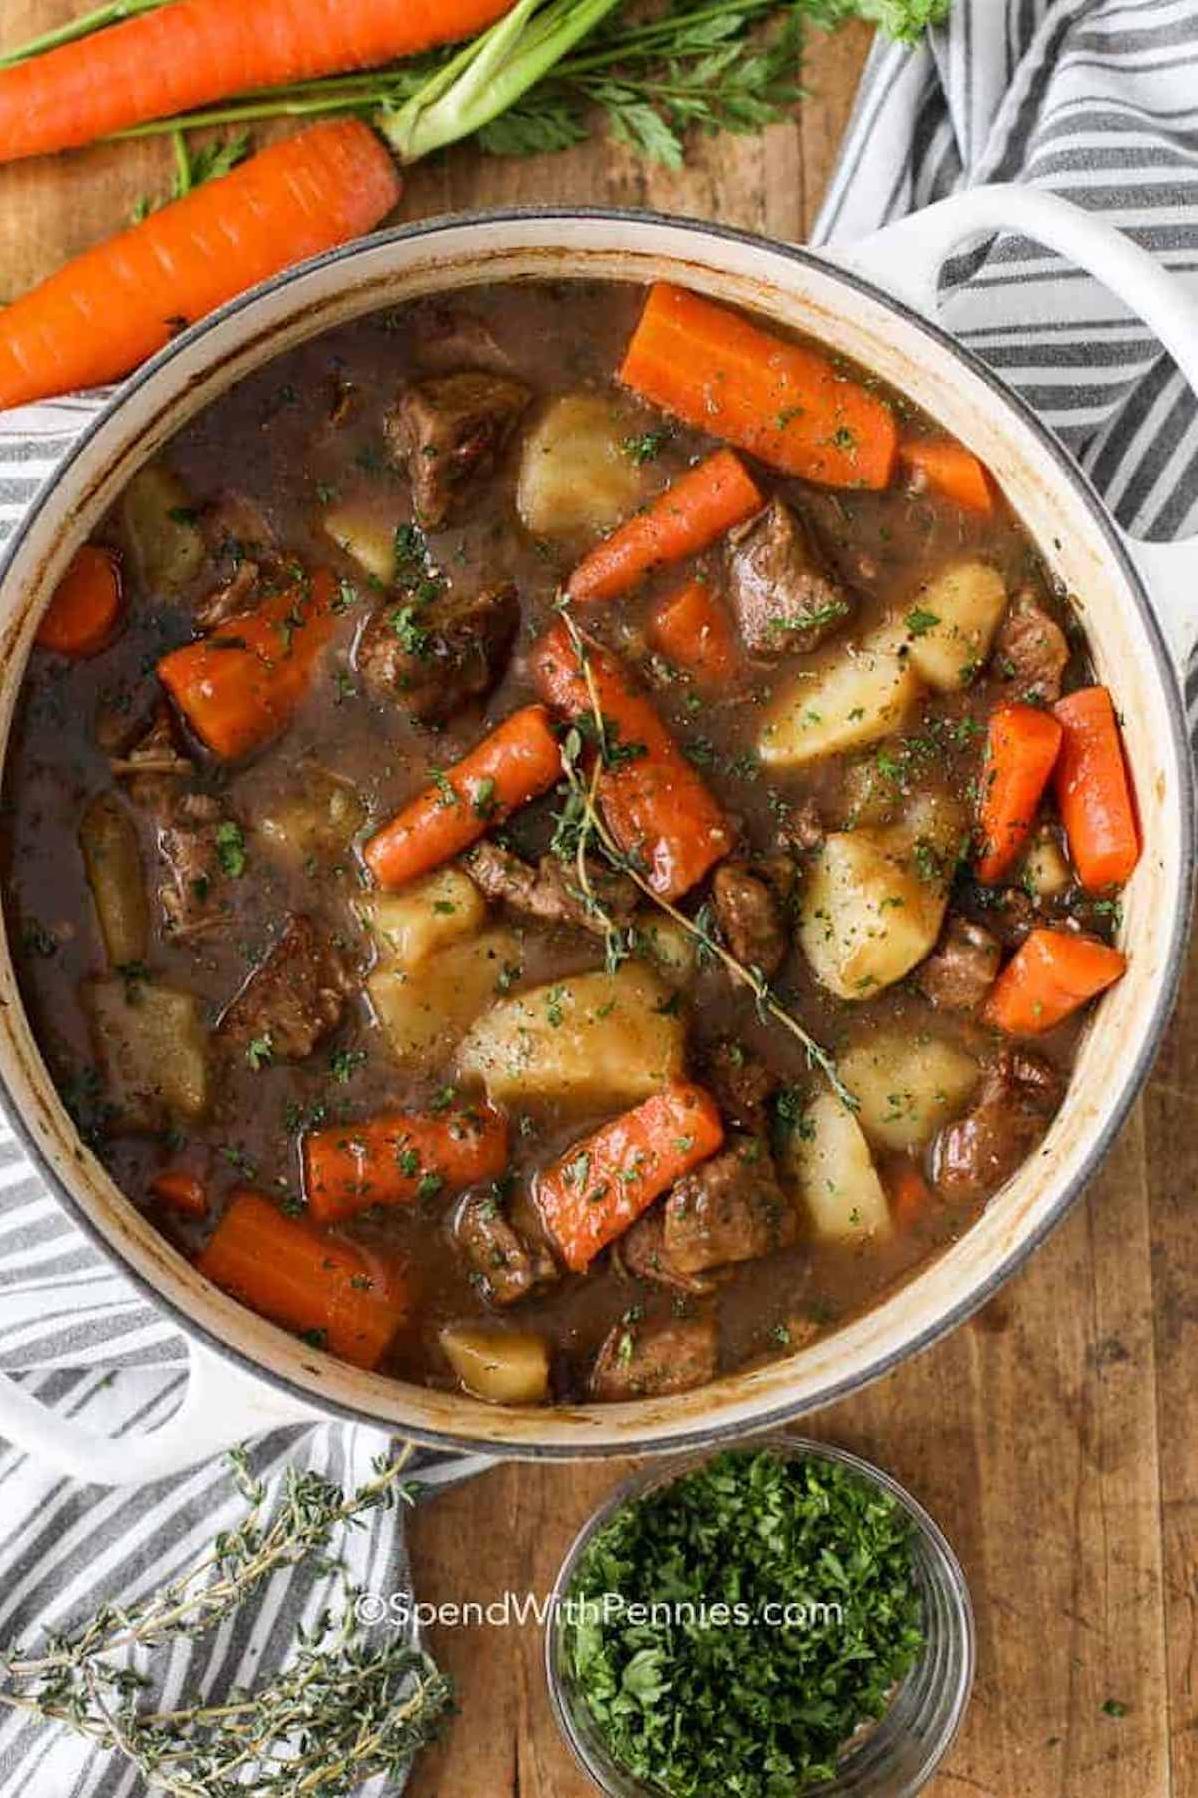  An aromatic stew that will leave your kitchen smelling divine